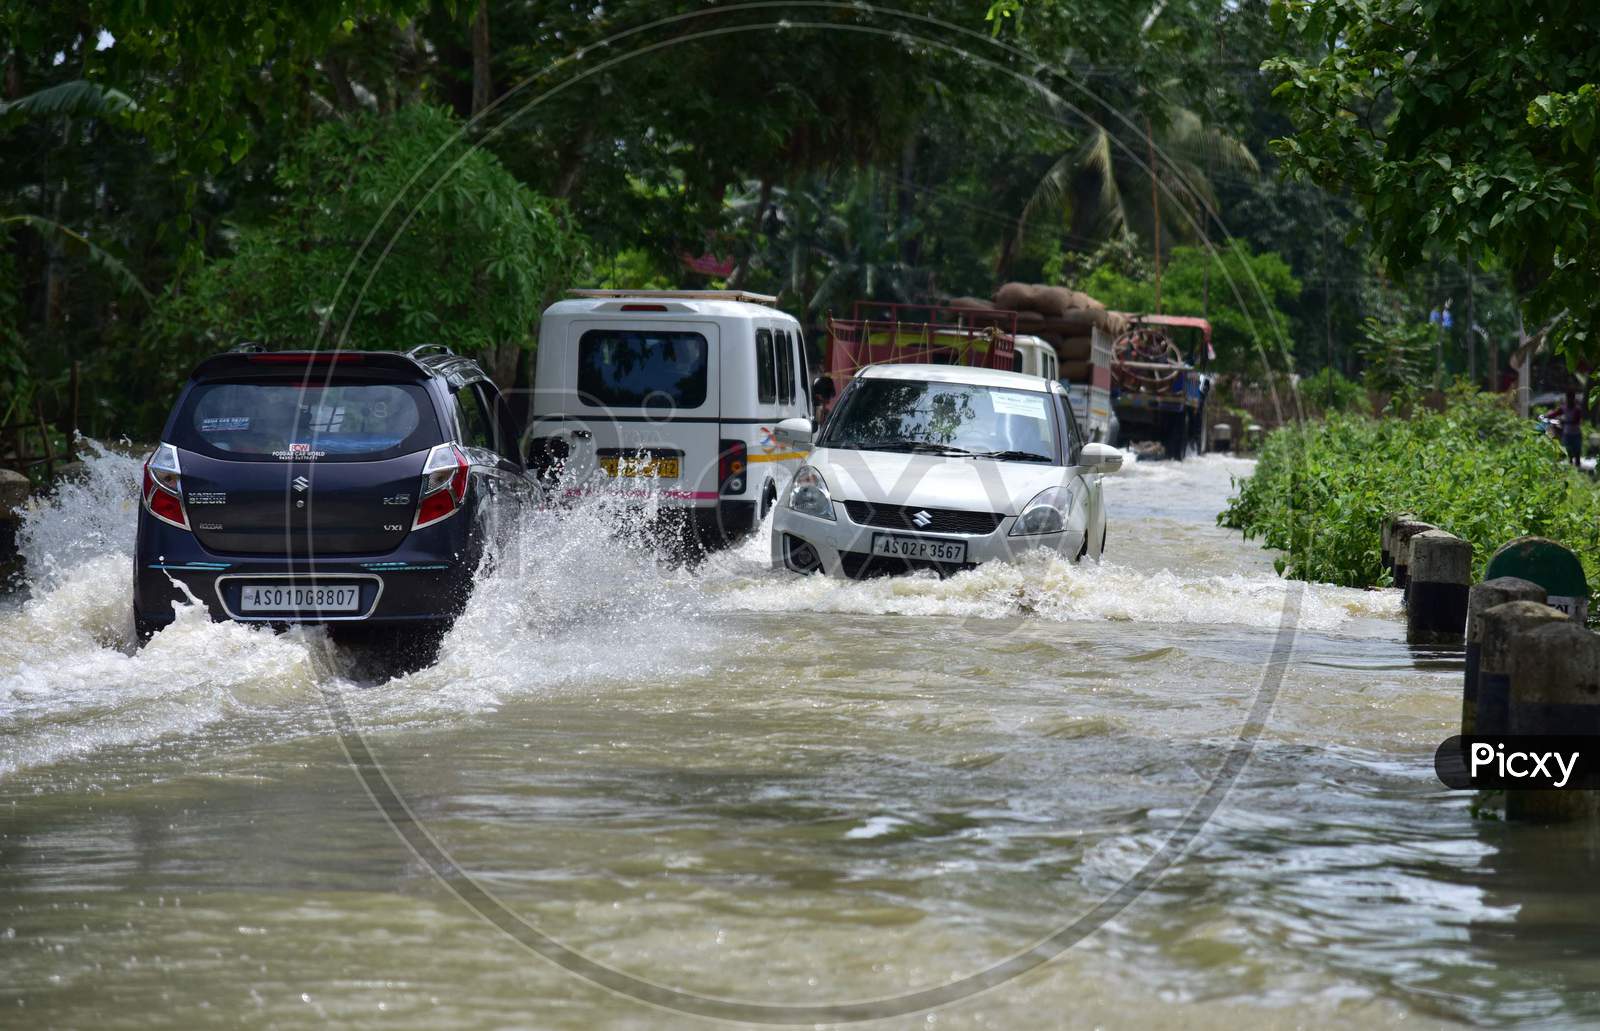 Vehicles Moving On Road Through Flood Waters In Kampur In Nagaon District Of Assam On May 29,2020.